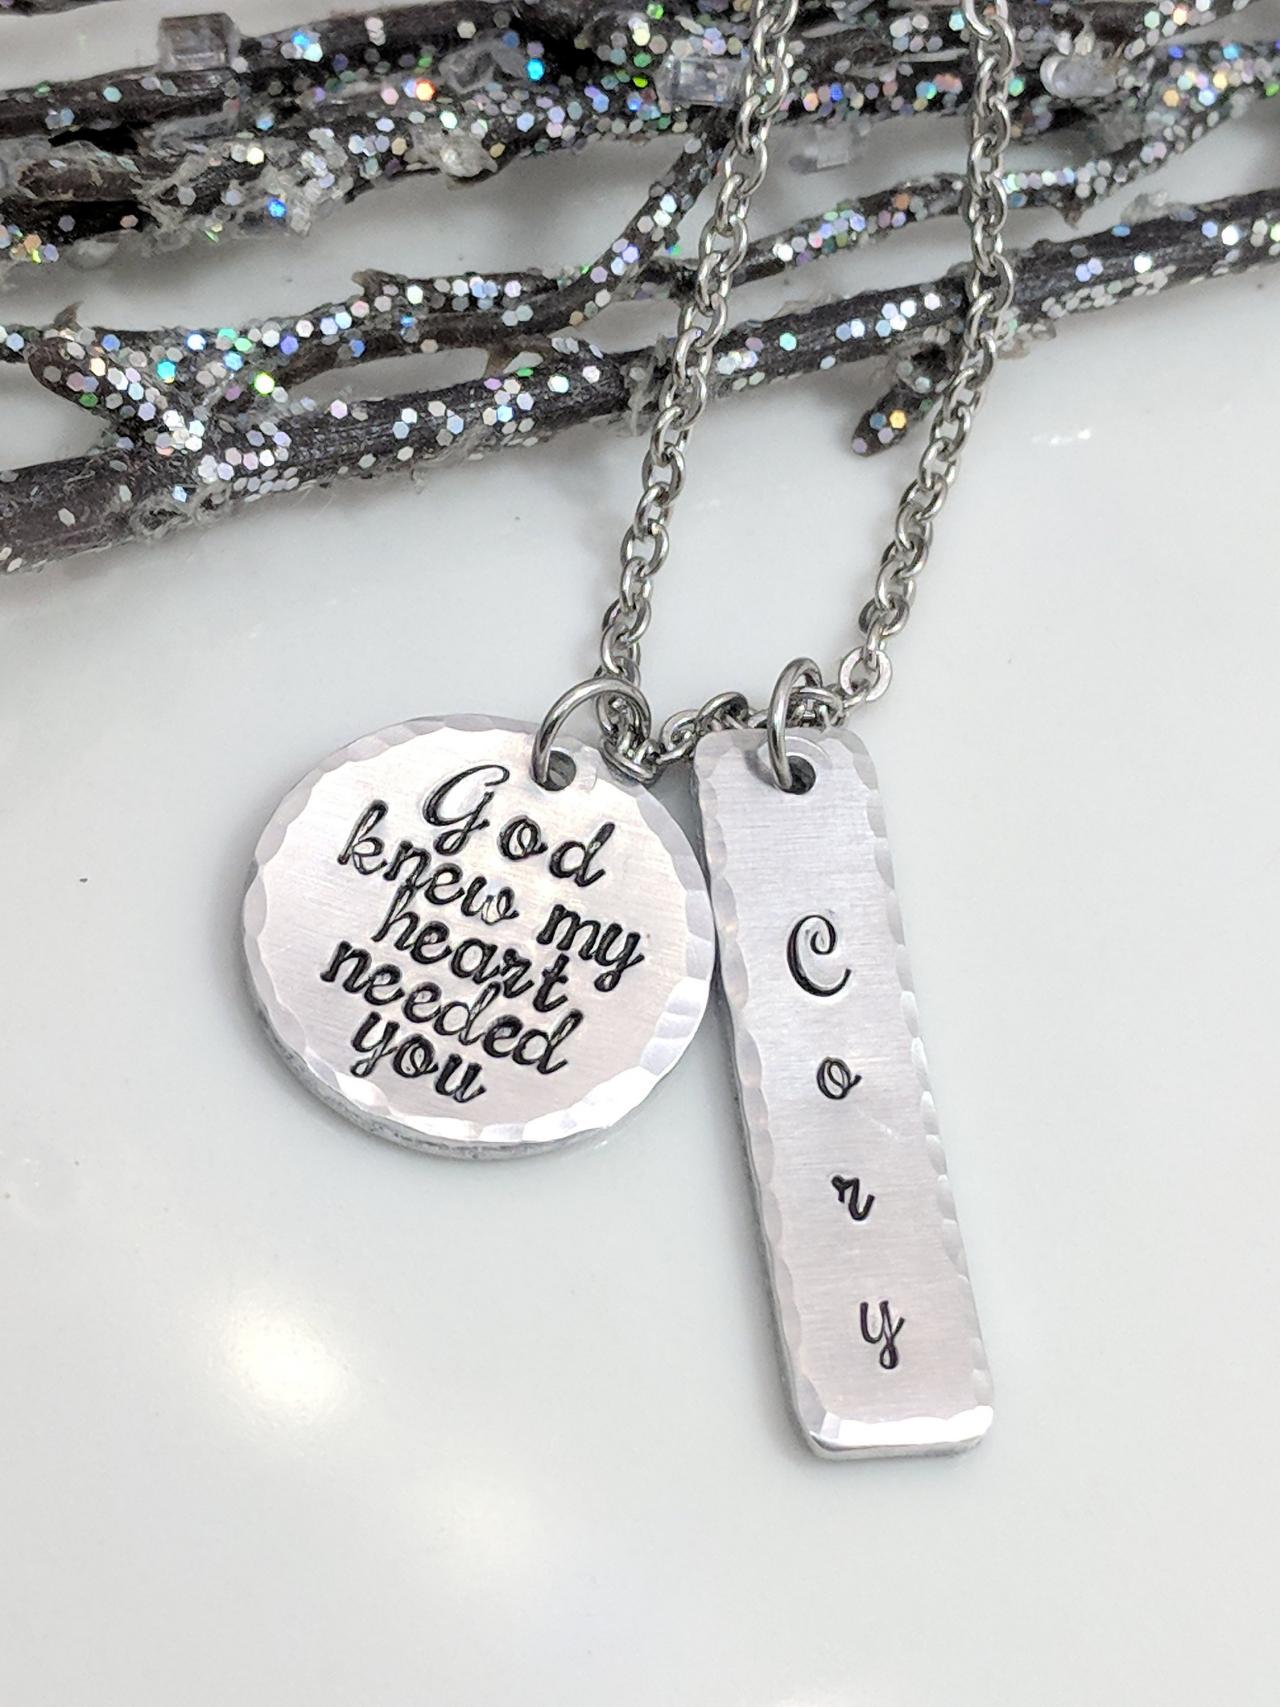 Motherhood Hand Stamped Necklace- Name Jewelry- Gift For Mom- God Knew My Heart Needed You- Personalized- Adoption- Christmas Gift- Mommy